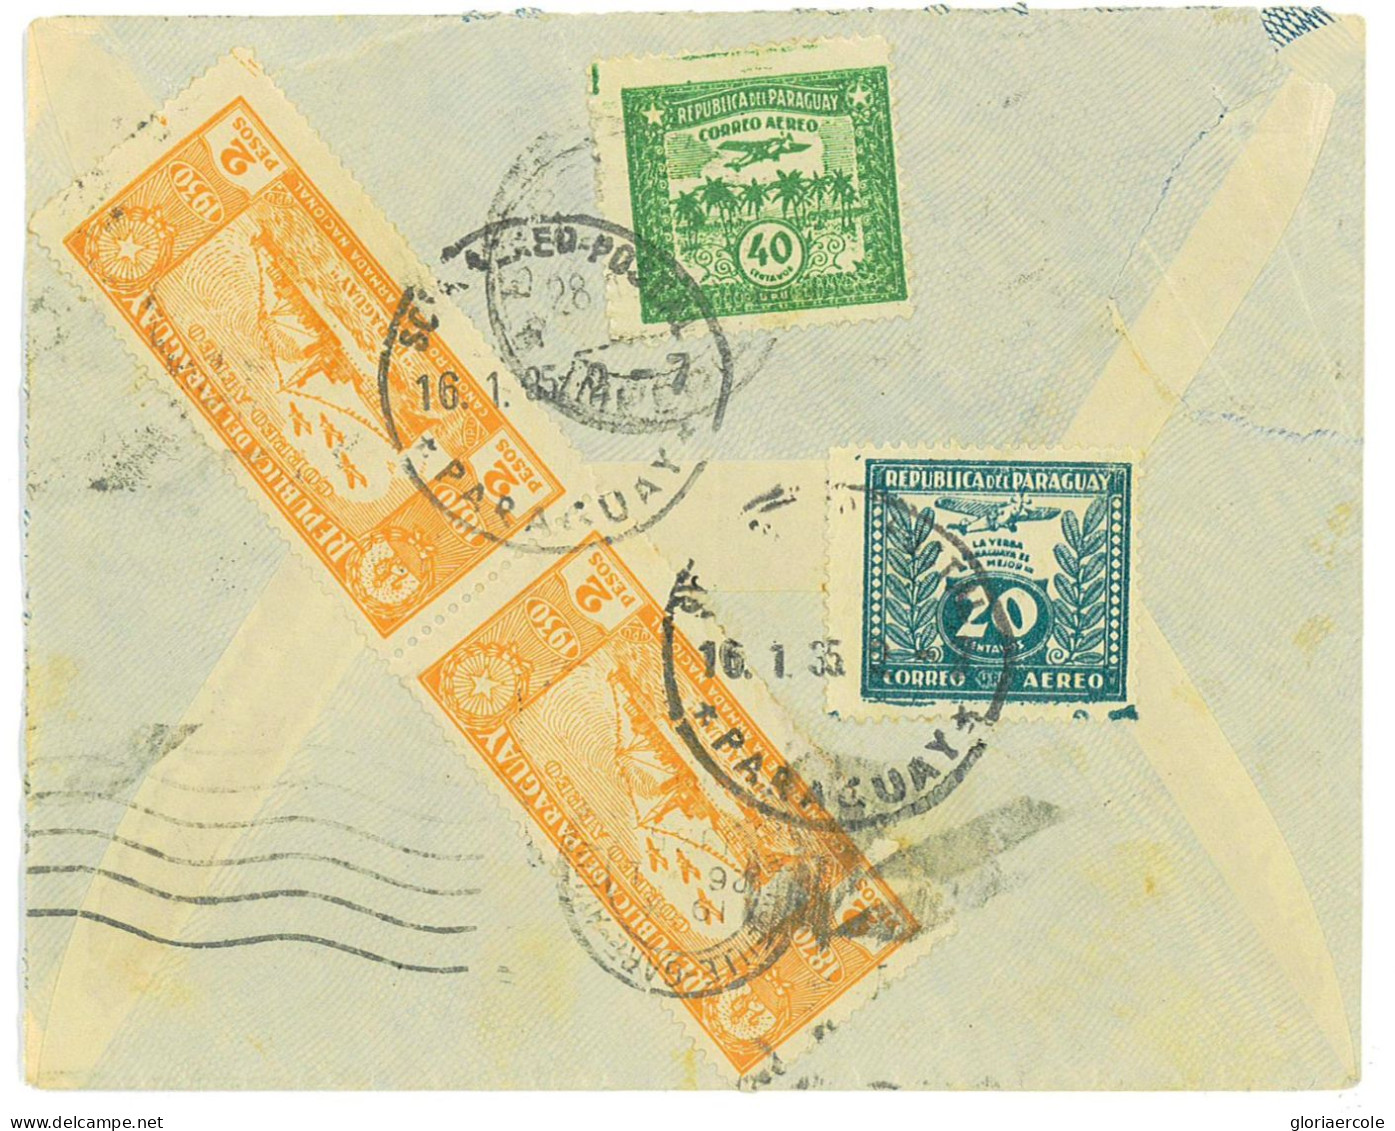 P2957 - PARAGUAY 1934, MULTIPLE STAMPS FRANKING , TO ITALY - Paraguay